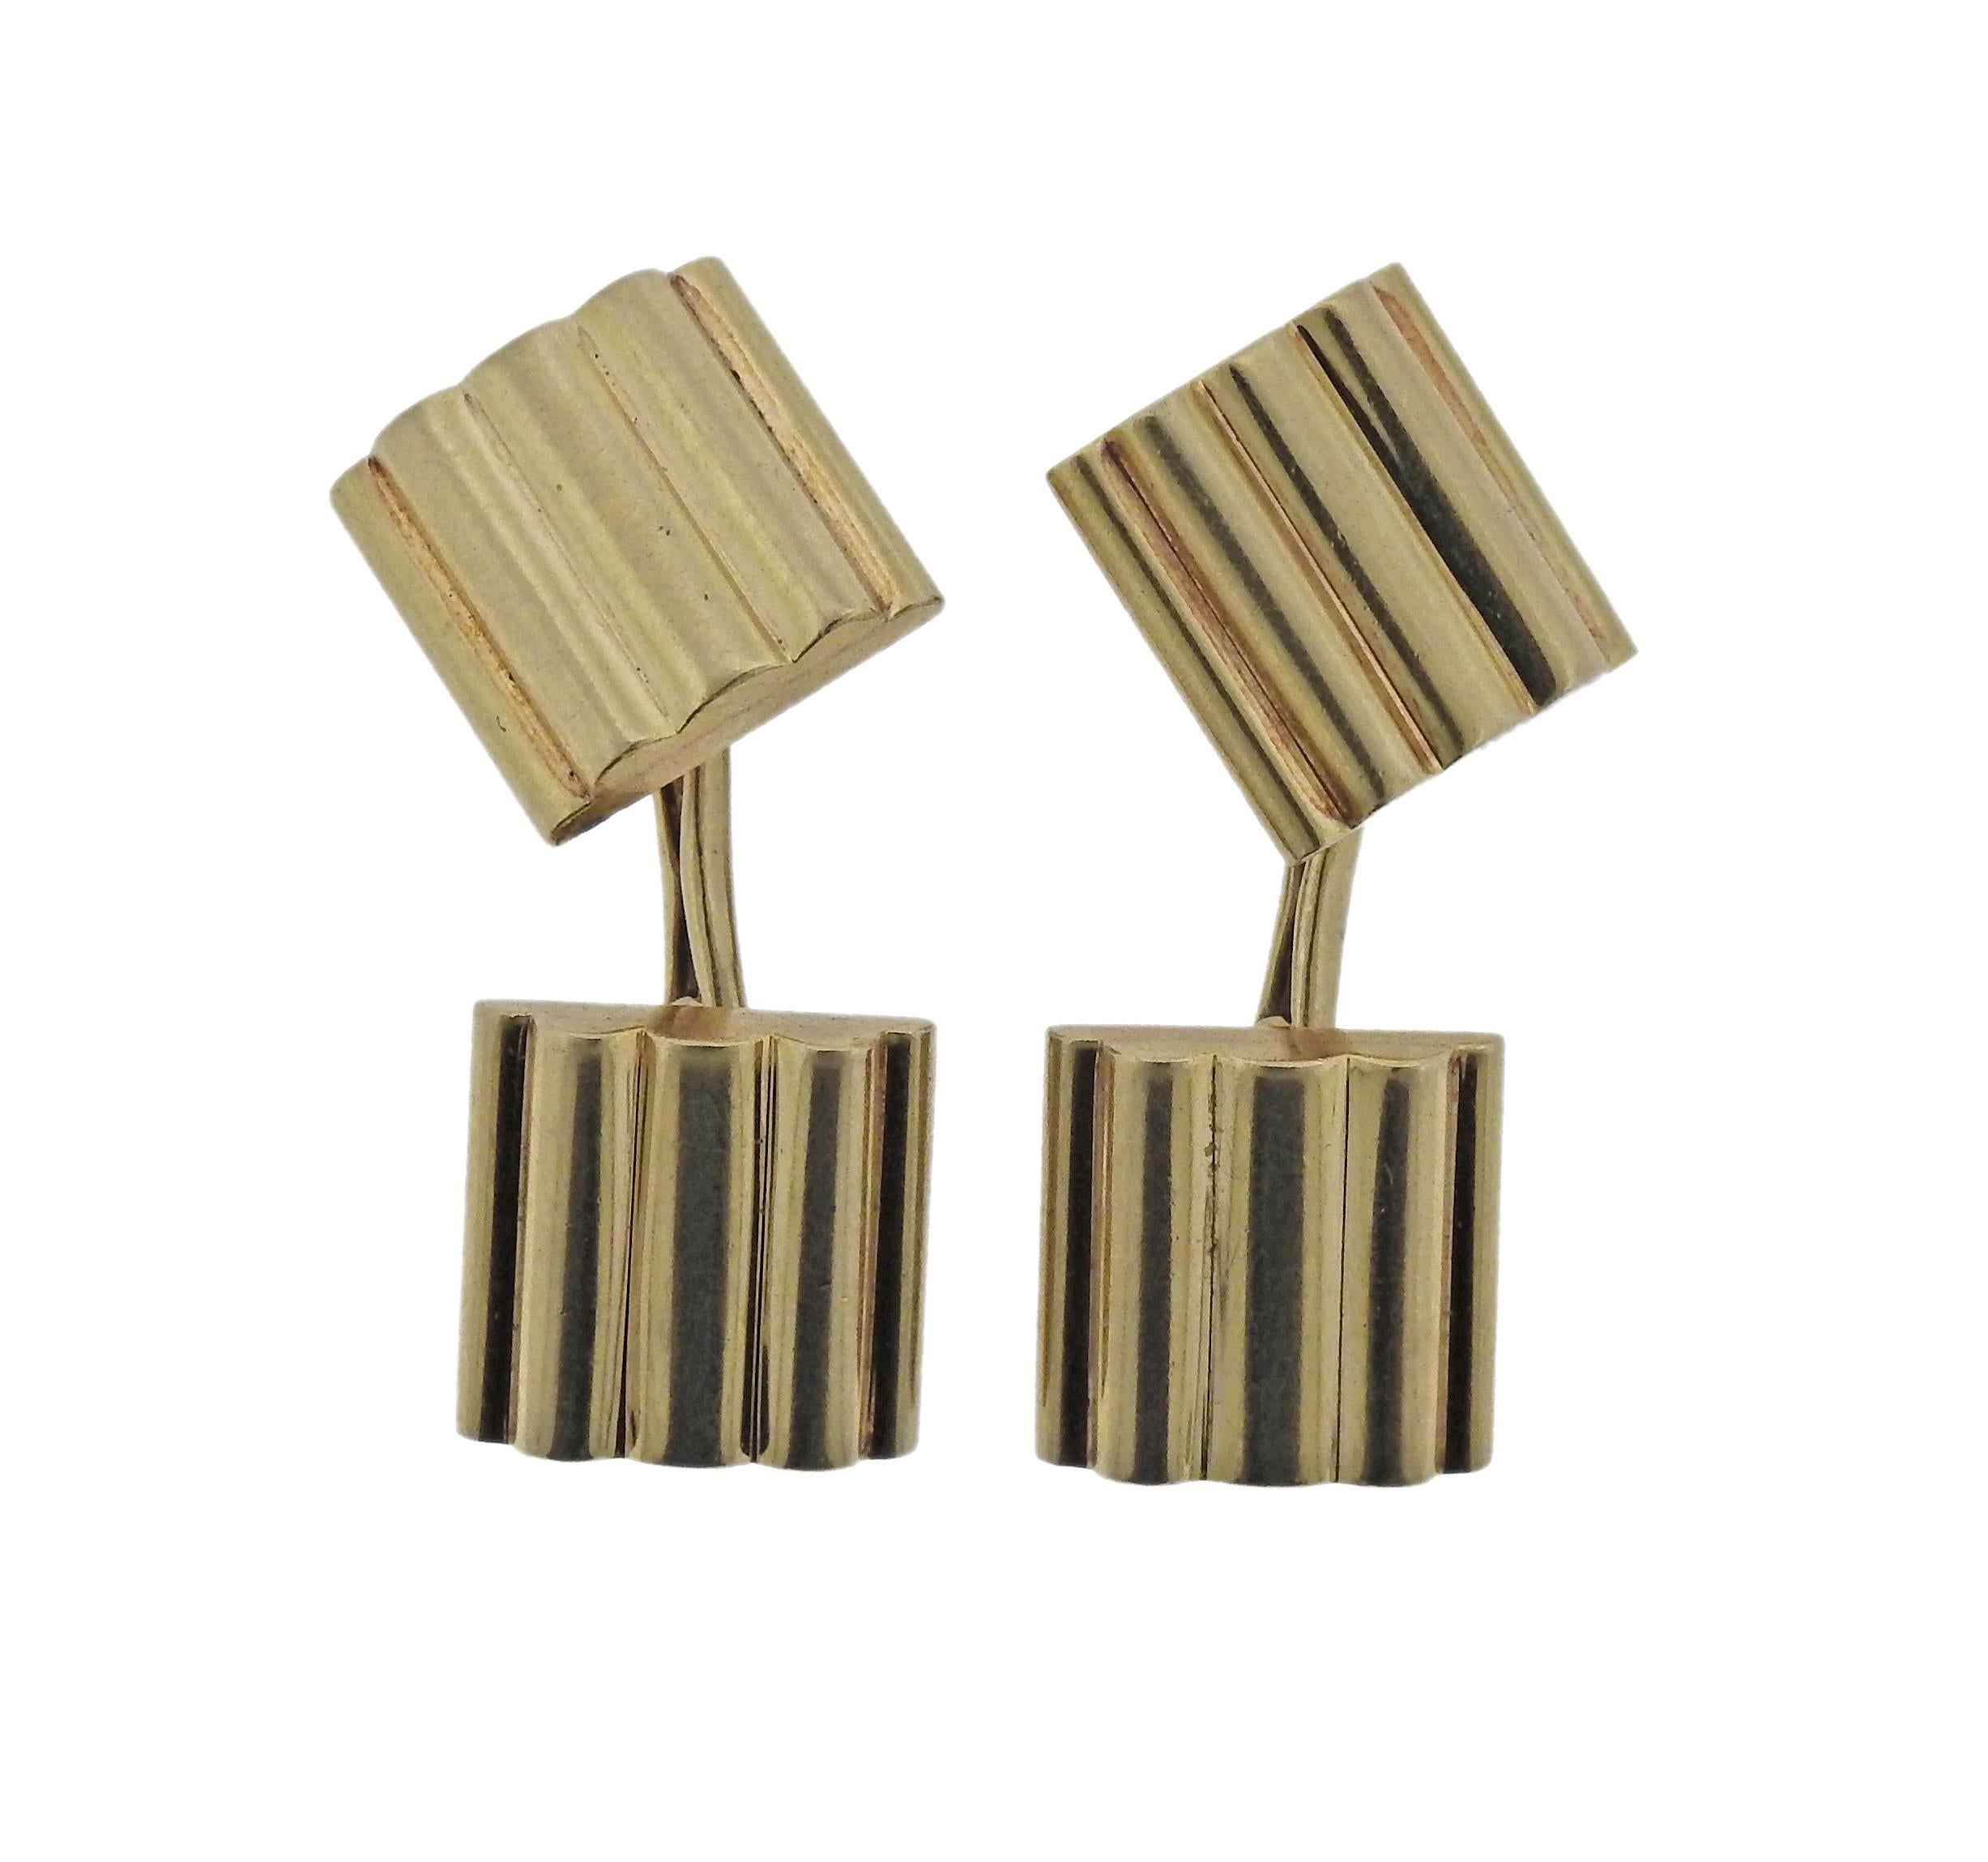 Pair of vintage 14k yellow gold cufflinks, crafted by Tiffany & Co. Cufflink tops measure 13mm x 13mm, weigh 17.3 grams. Marked: Tiffany & Co., 14K.